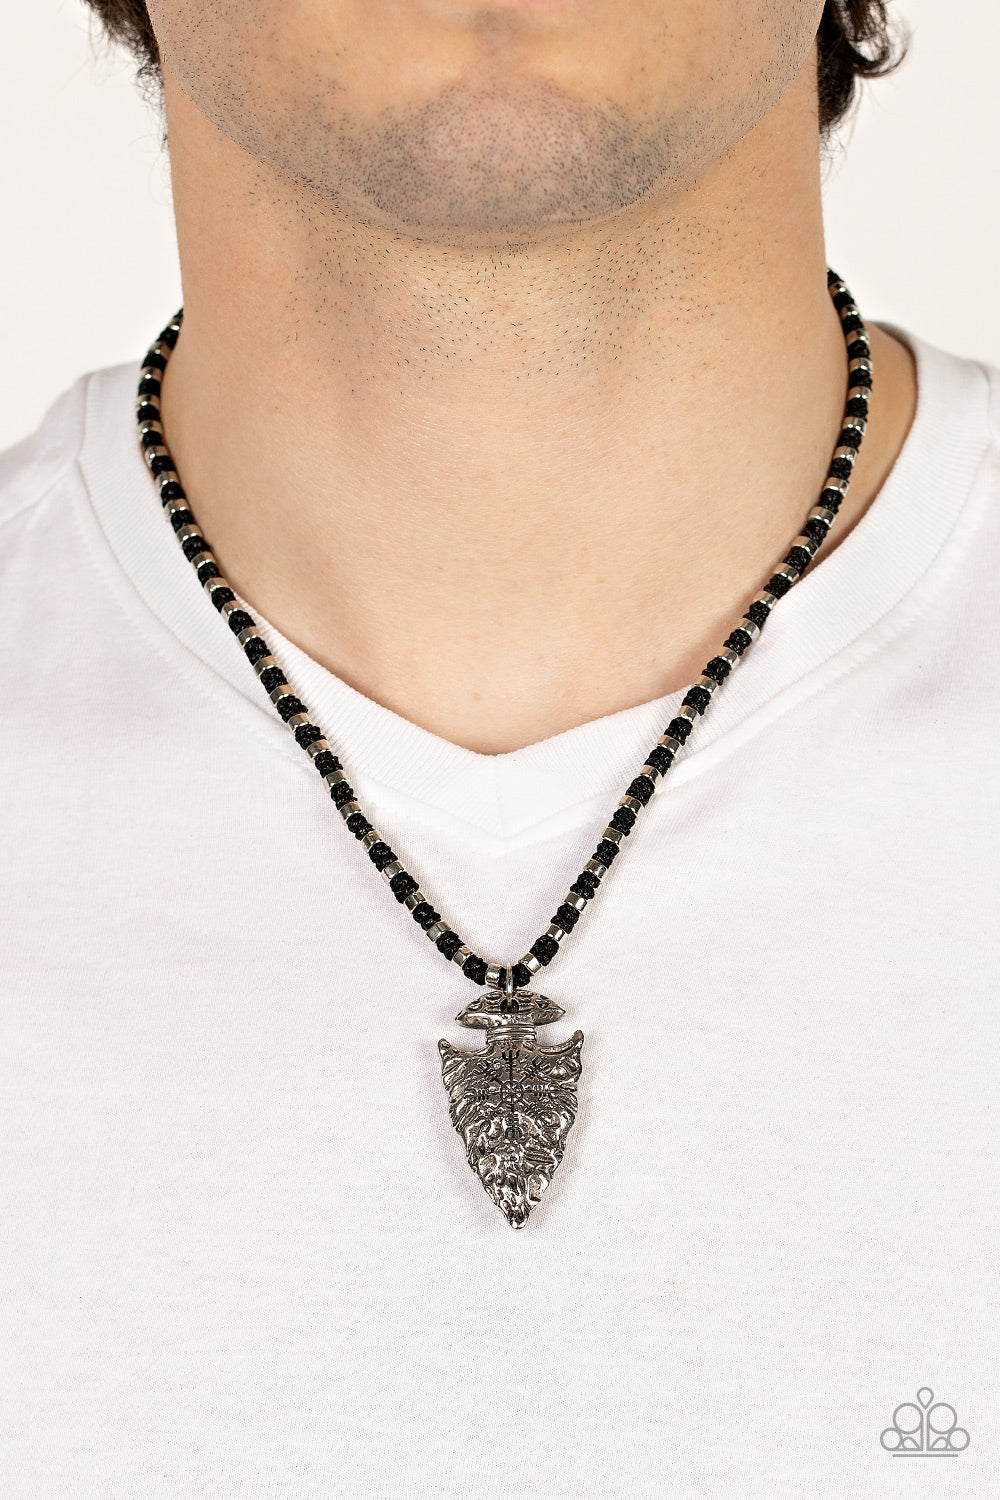 Get Your ARROWHEAD in the Game - Black Necklace Paparazzi Accessories Men's Urban Necklace